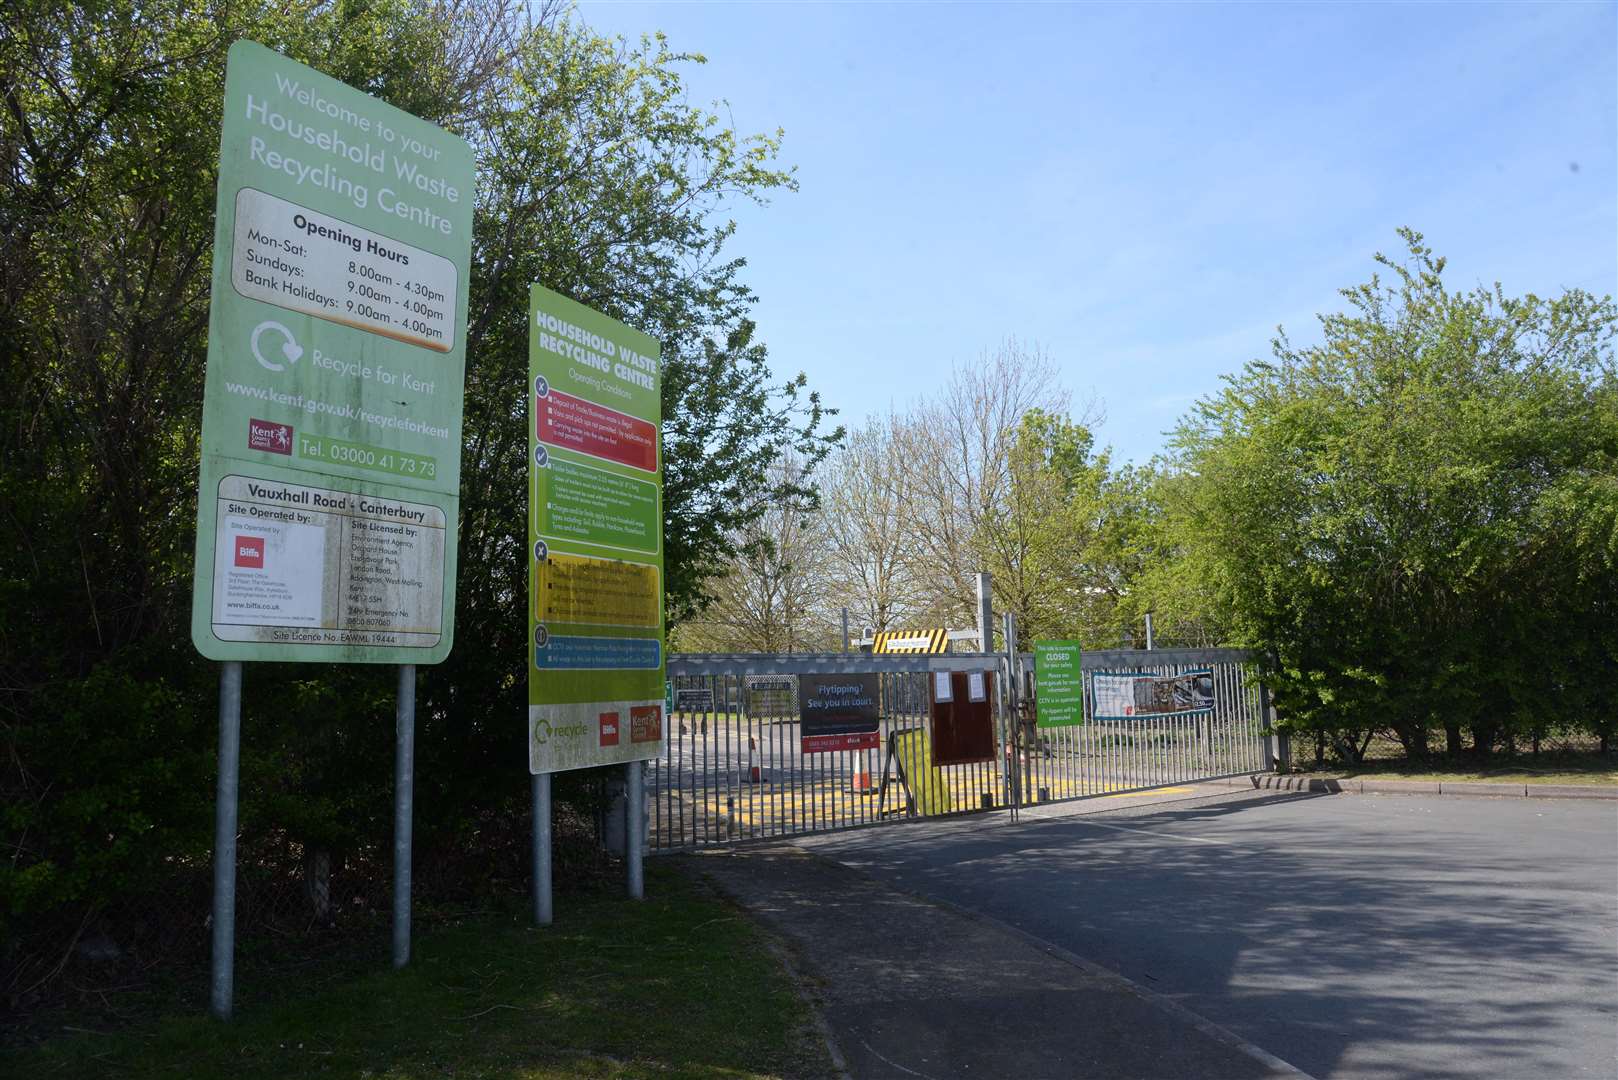 The Canterbury Household Waste and Recycling Centre in Vauxhall Road was among those sites closed due to Covid-19